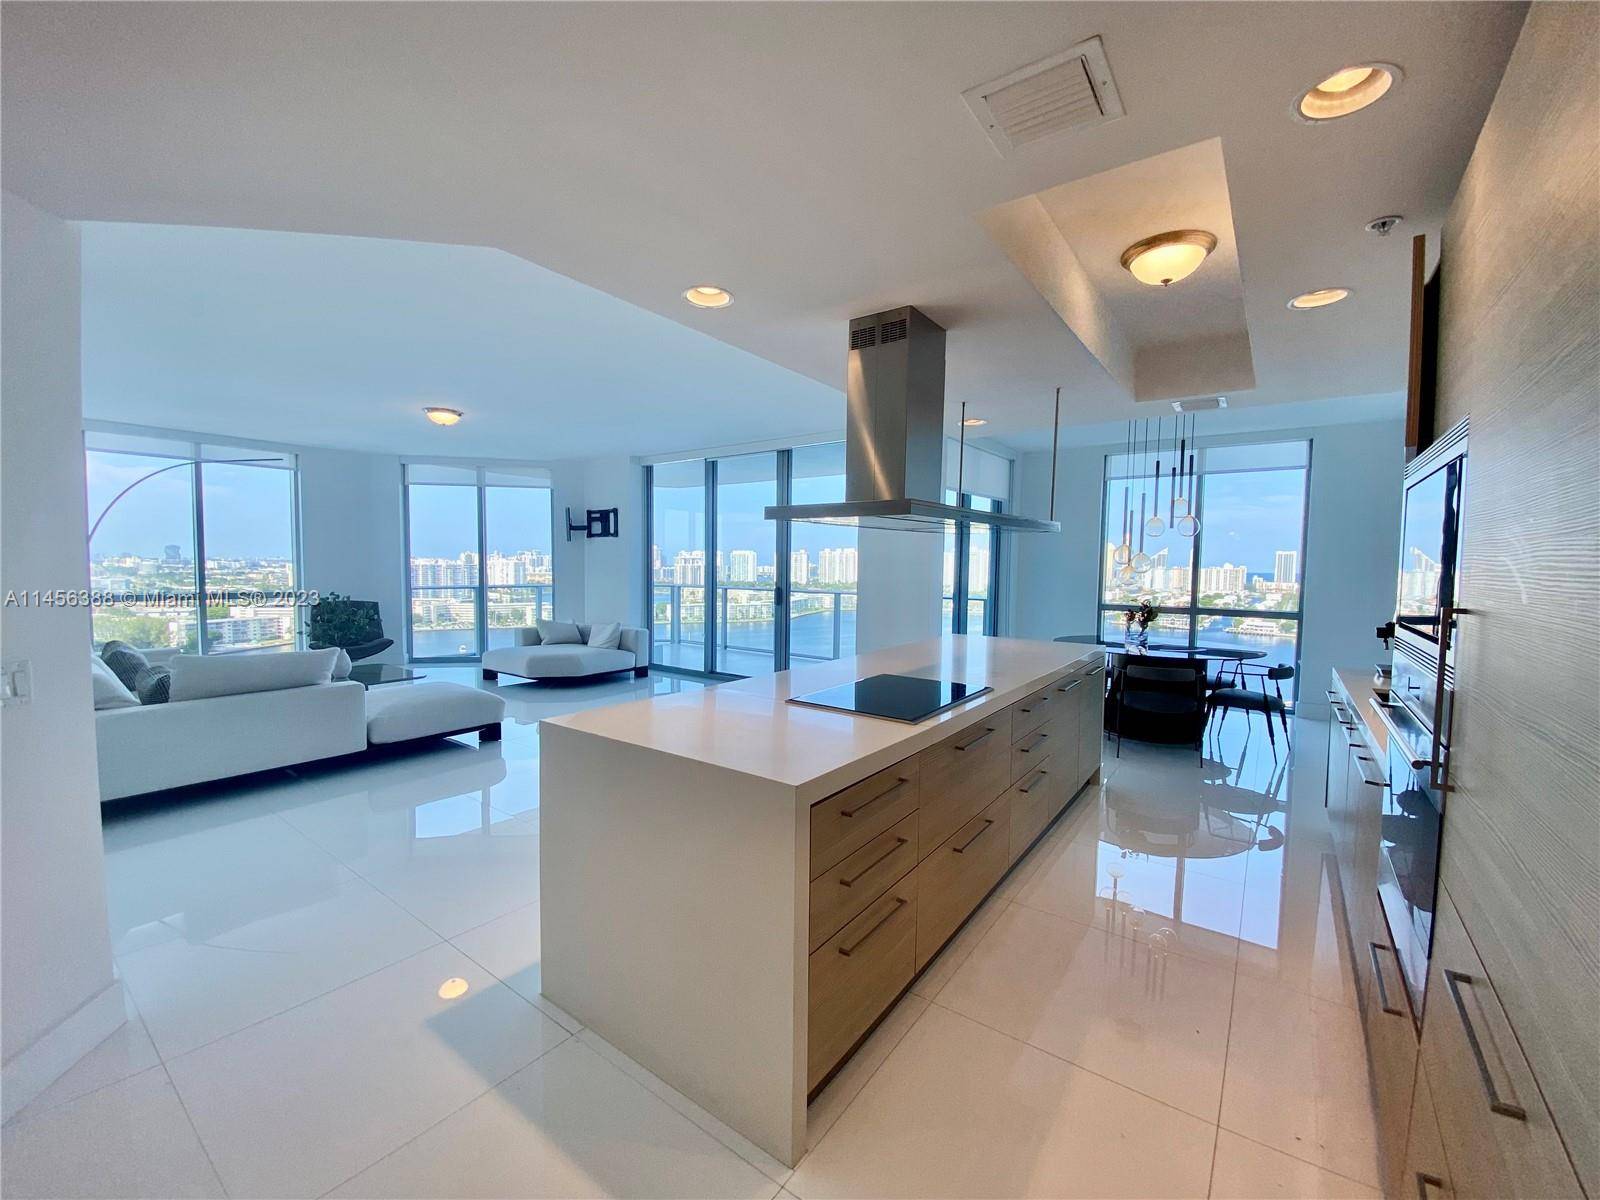 Luxury 3 bedrooms and 3 1 2 bathrooms furnished unit at Marina Palm, brand new furniture ready to immediate occupancy.